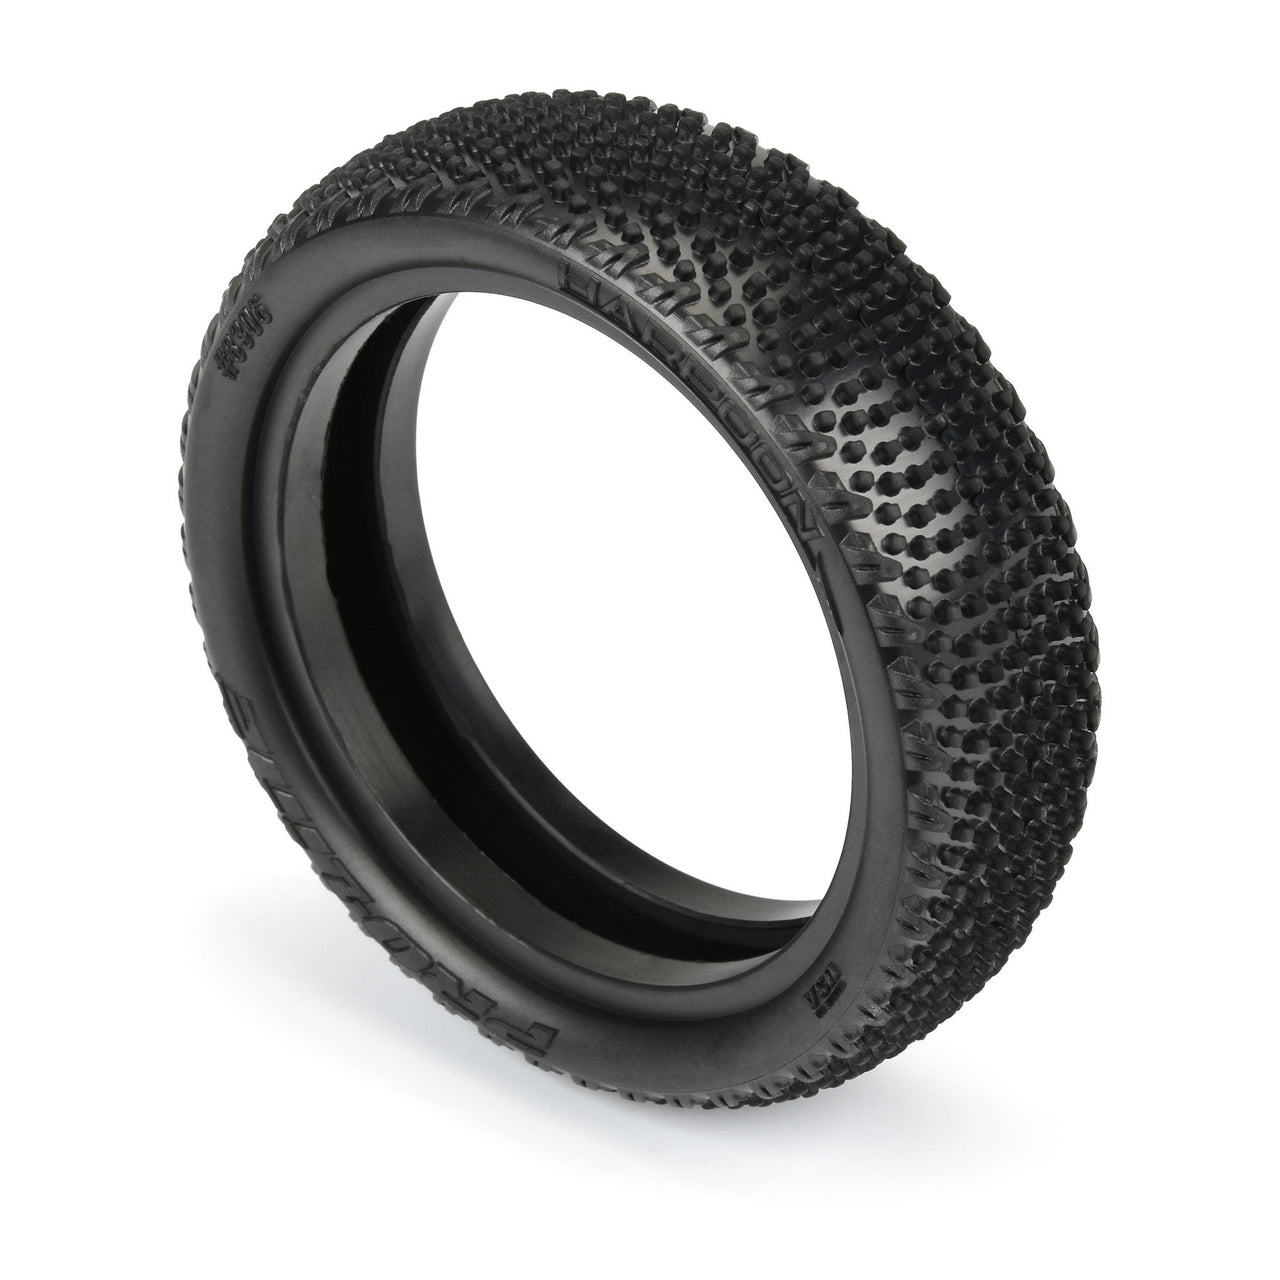 PRO8306303 1/10 Harpoon CR3 2WD Front 2.2" Carpet Buggy Tires (2)